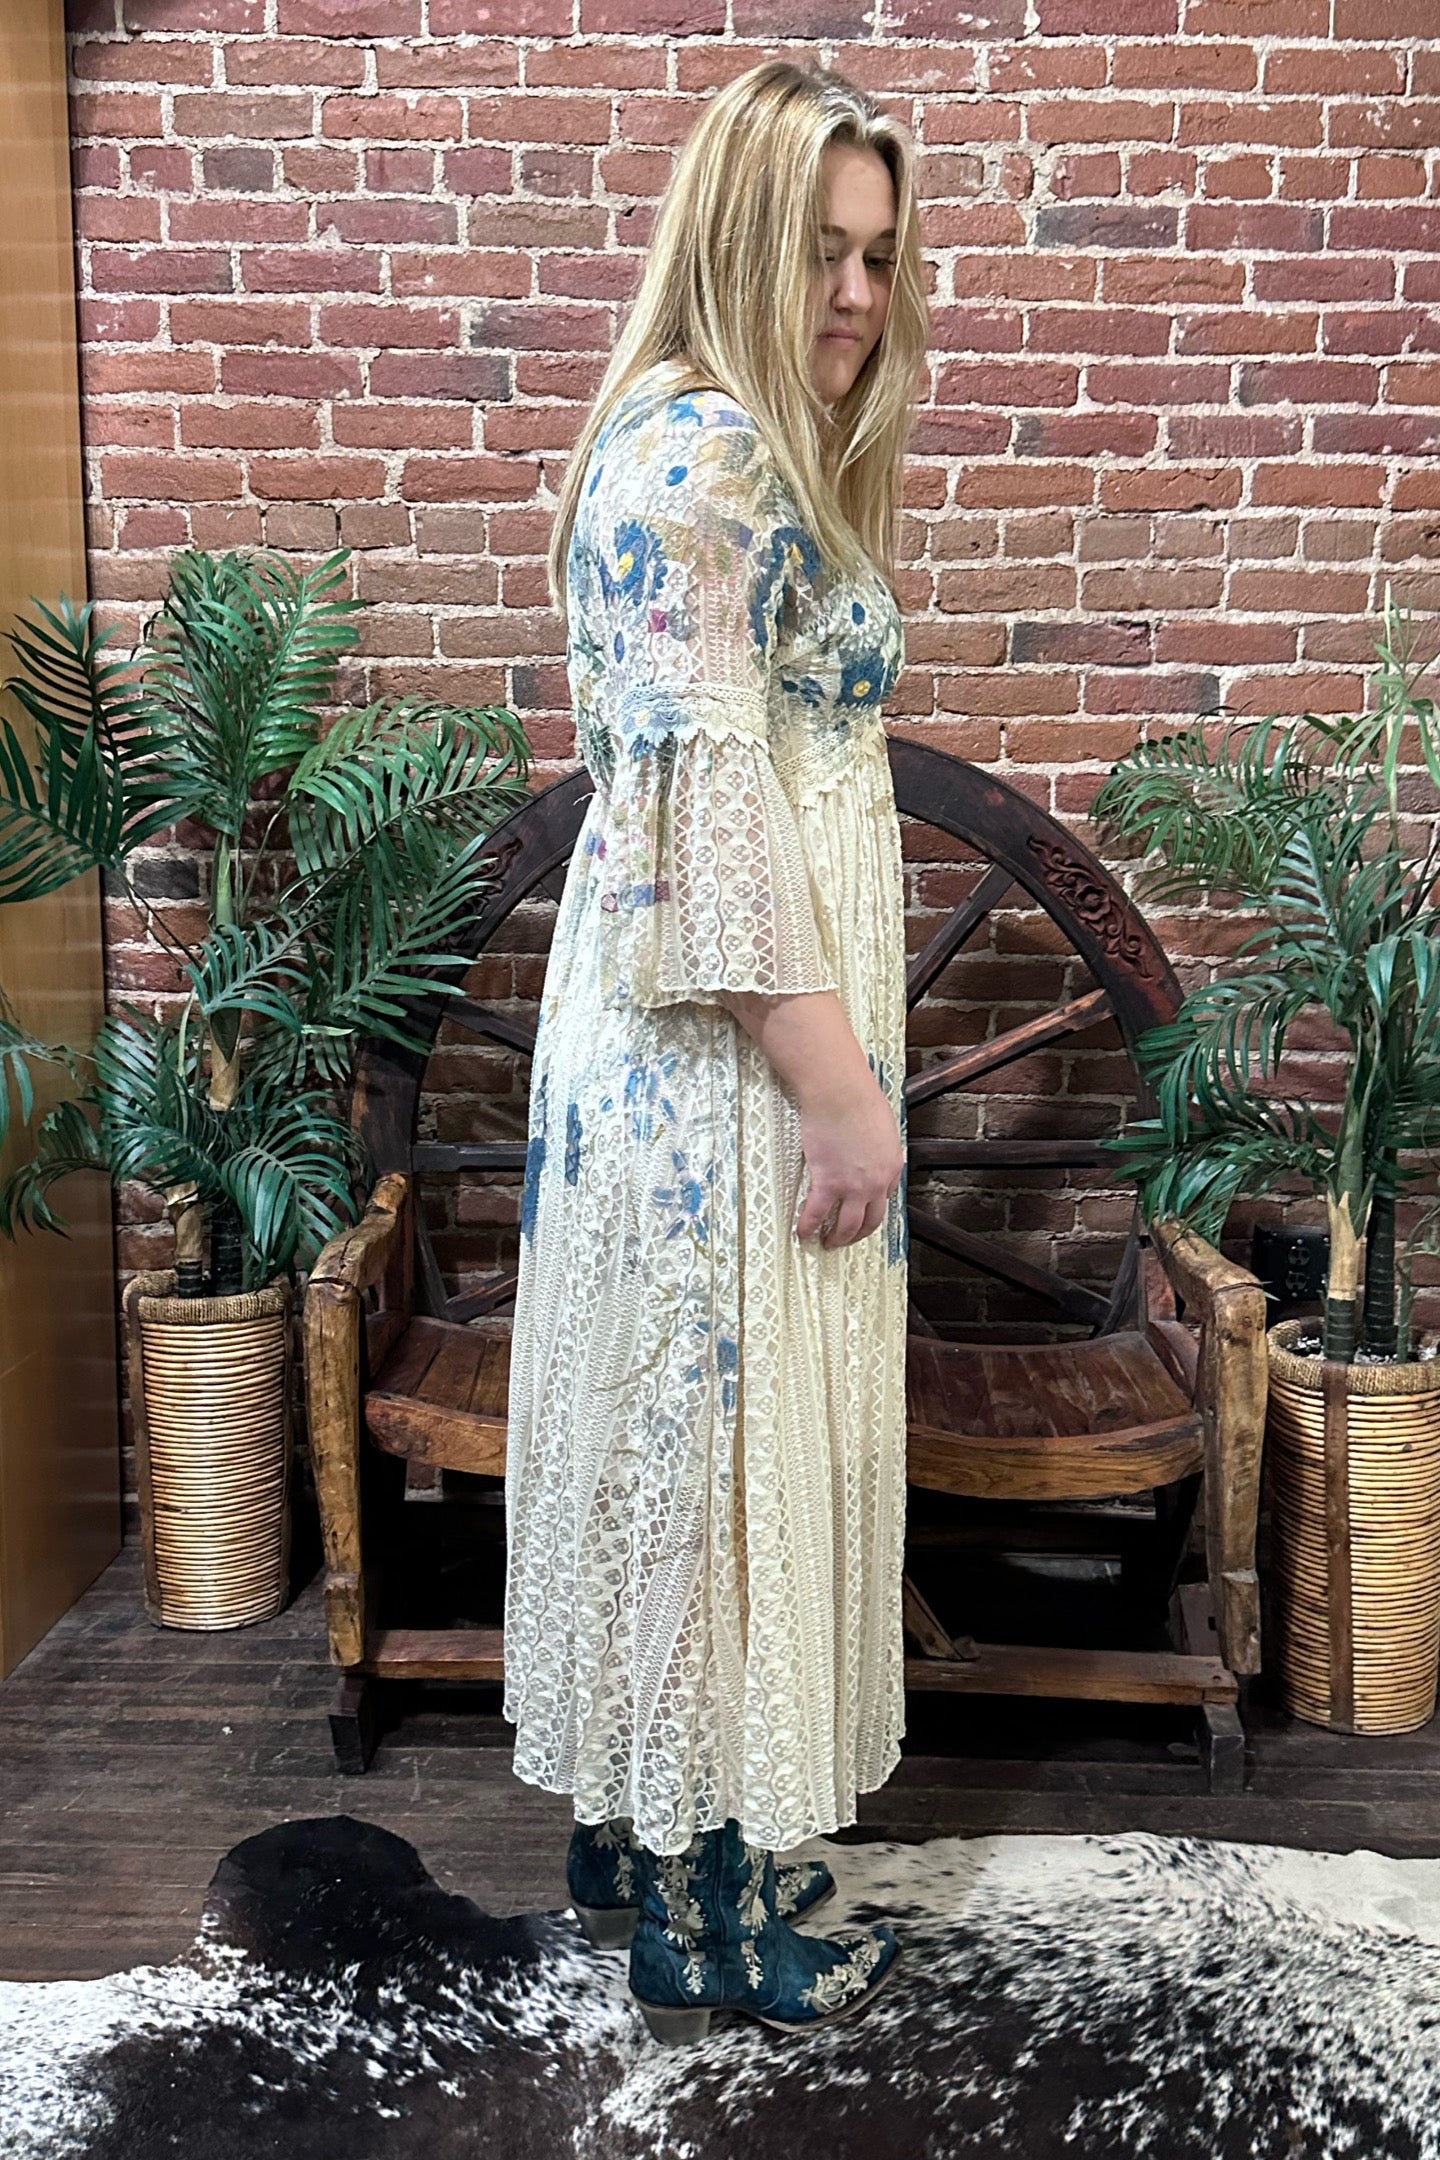 Springtime Lace and Crochet Dress by Origami Apparel-Dress-Origami-Gallop 'n Glitz- Women's Western Wear Boutique, Located in Grants Pass, Oregon